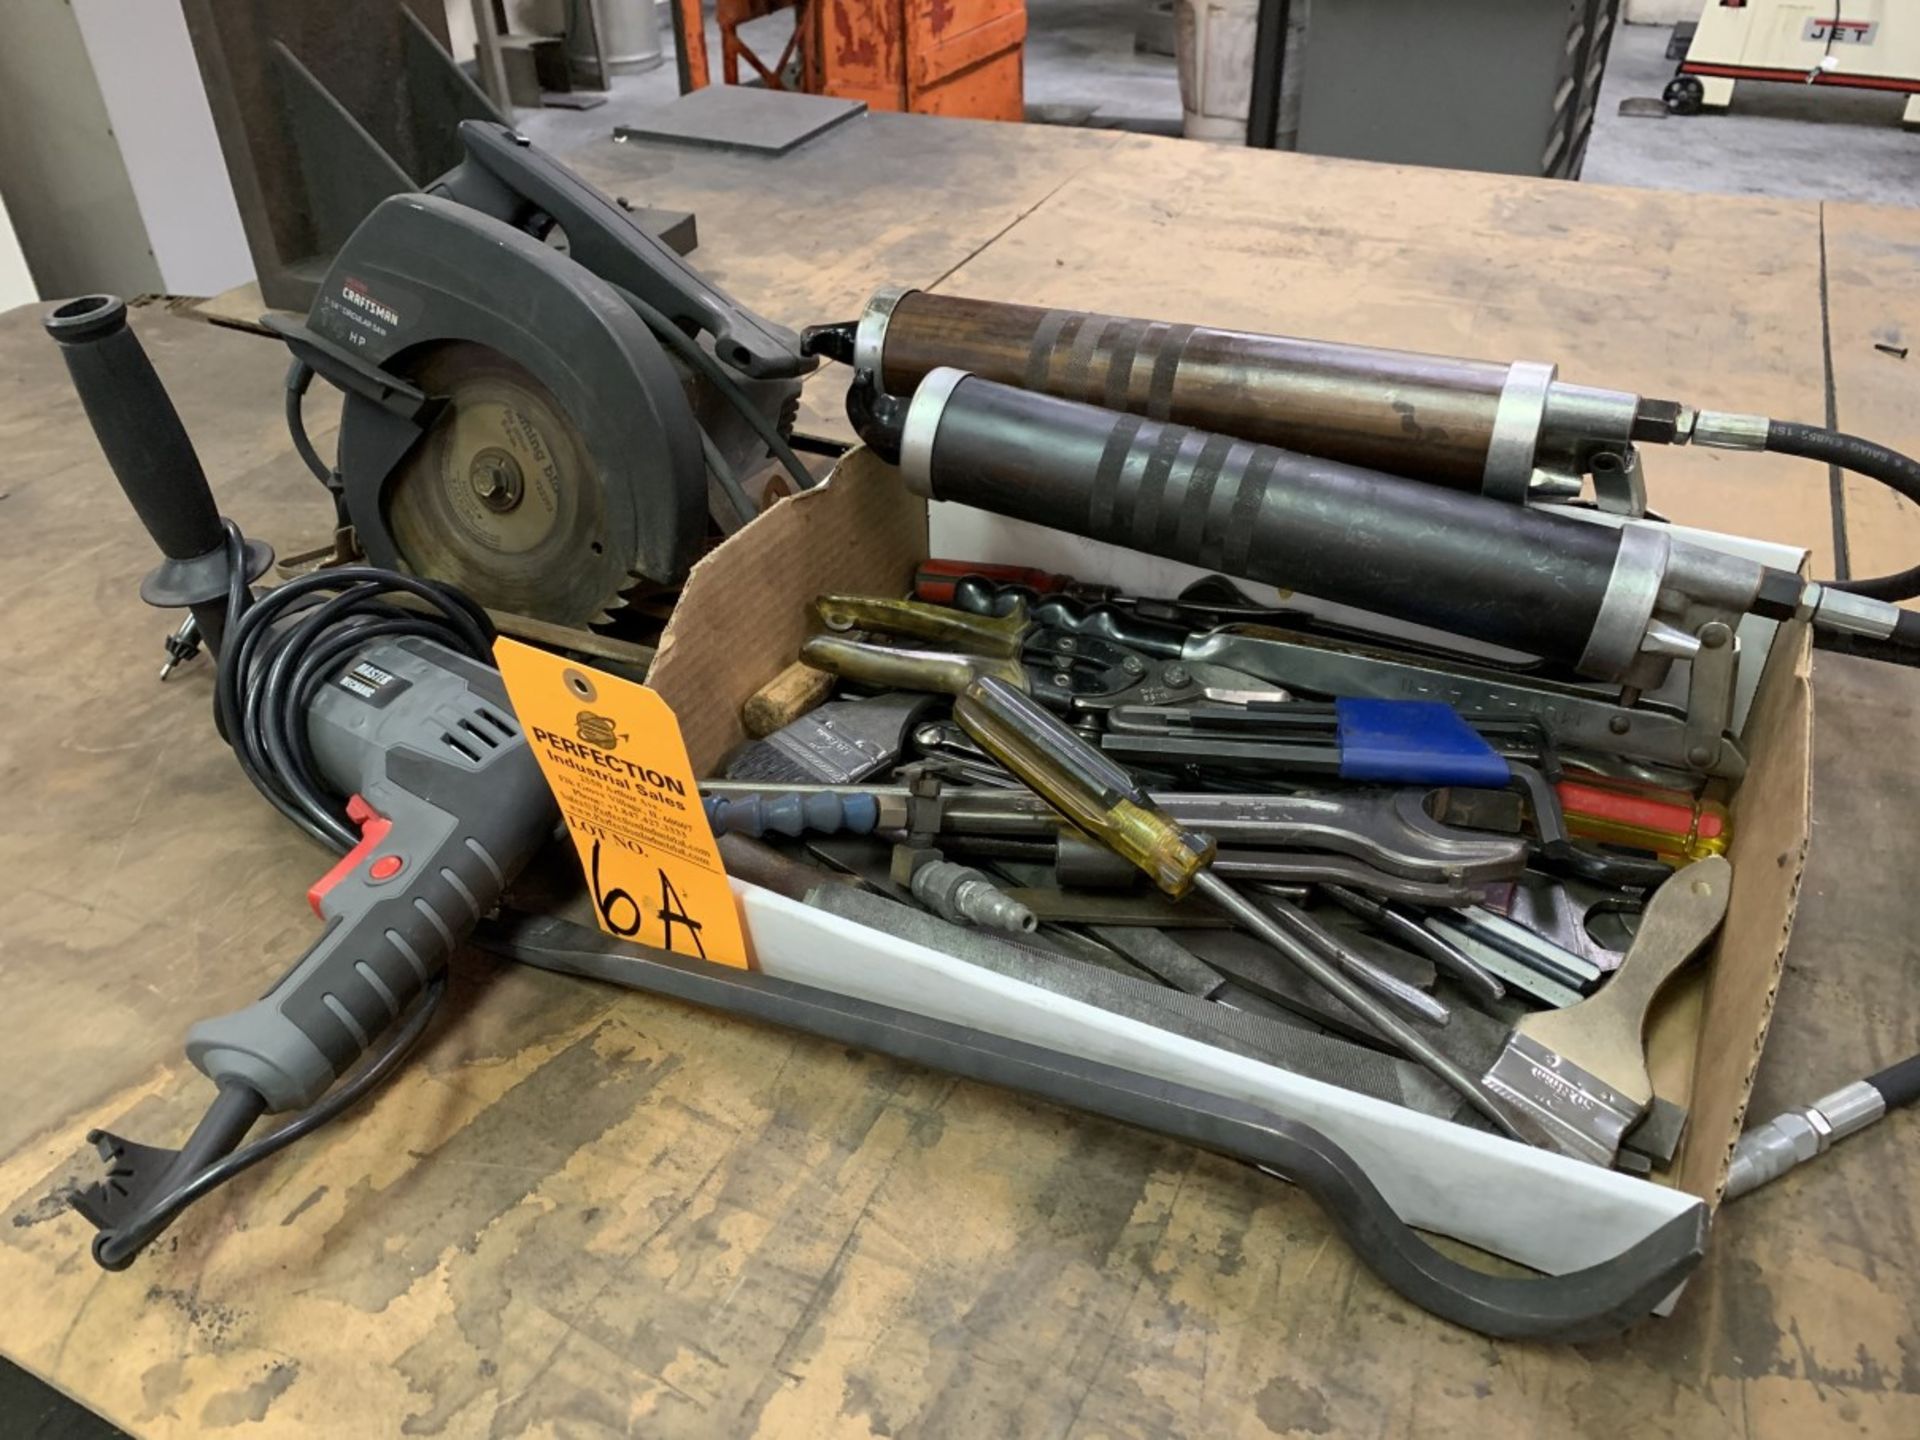 Lot of Assorted Hand Tools, Grease Guns, Craftsman Circular Saw and Master Mechanic Drill (Located